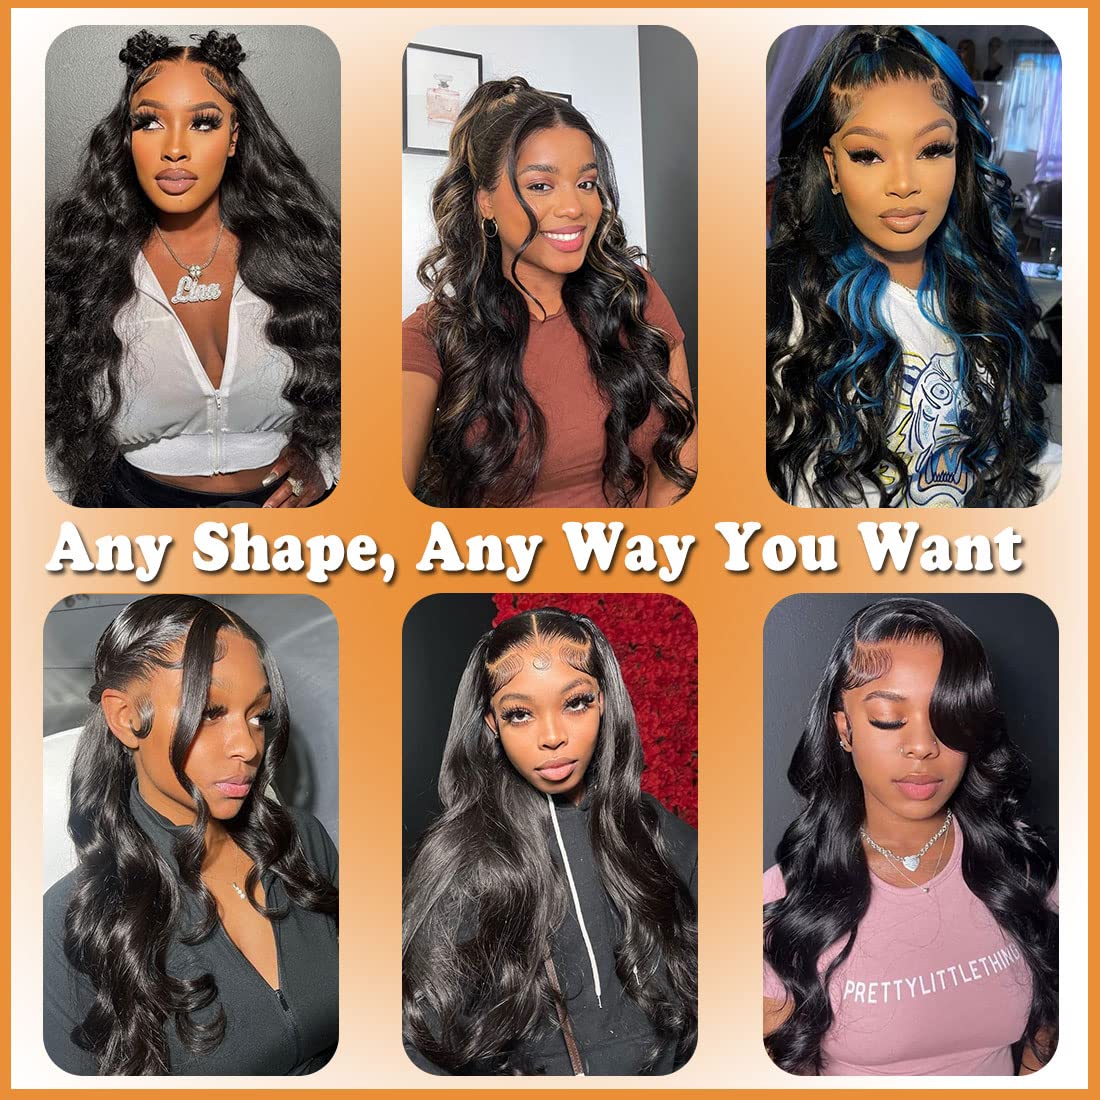 TRP 28 Inch Body Wave Lace Front Wigs Human Hair 180 Density, 13x4 HD Transparent Lace Frontal Wigs Human Hair Glueless Brazilian Virgin Human Hair Lace Front Wigs Pre Plucked with Baby Hair